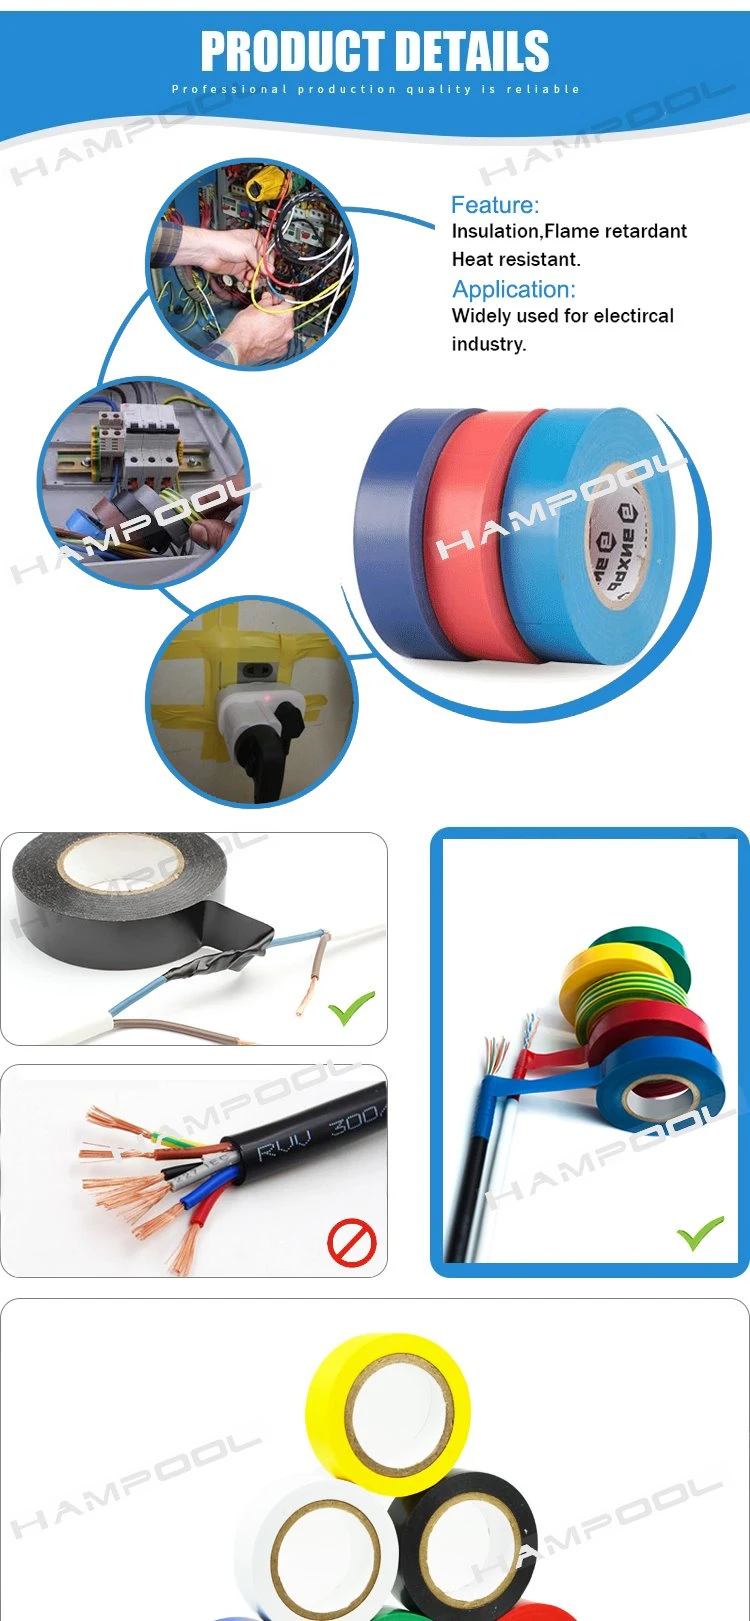 Hampool Electrical Insulated High Performance 0.15mm Thickness PVC Electrical Insulation Tape